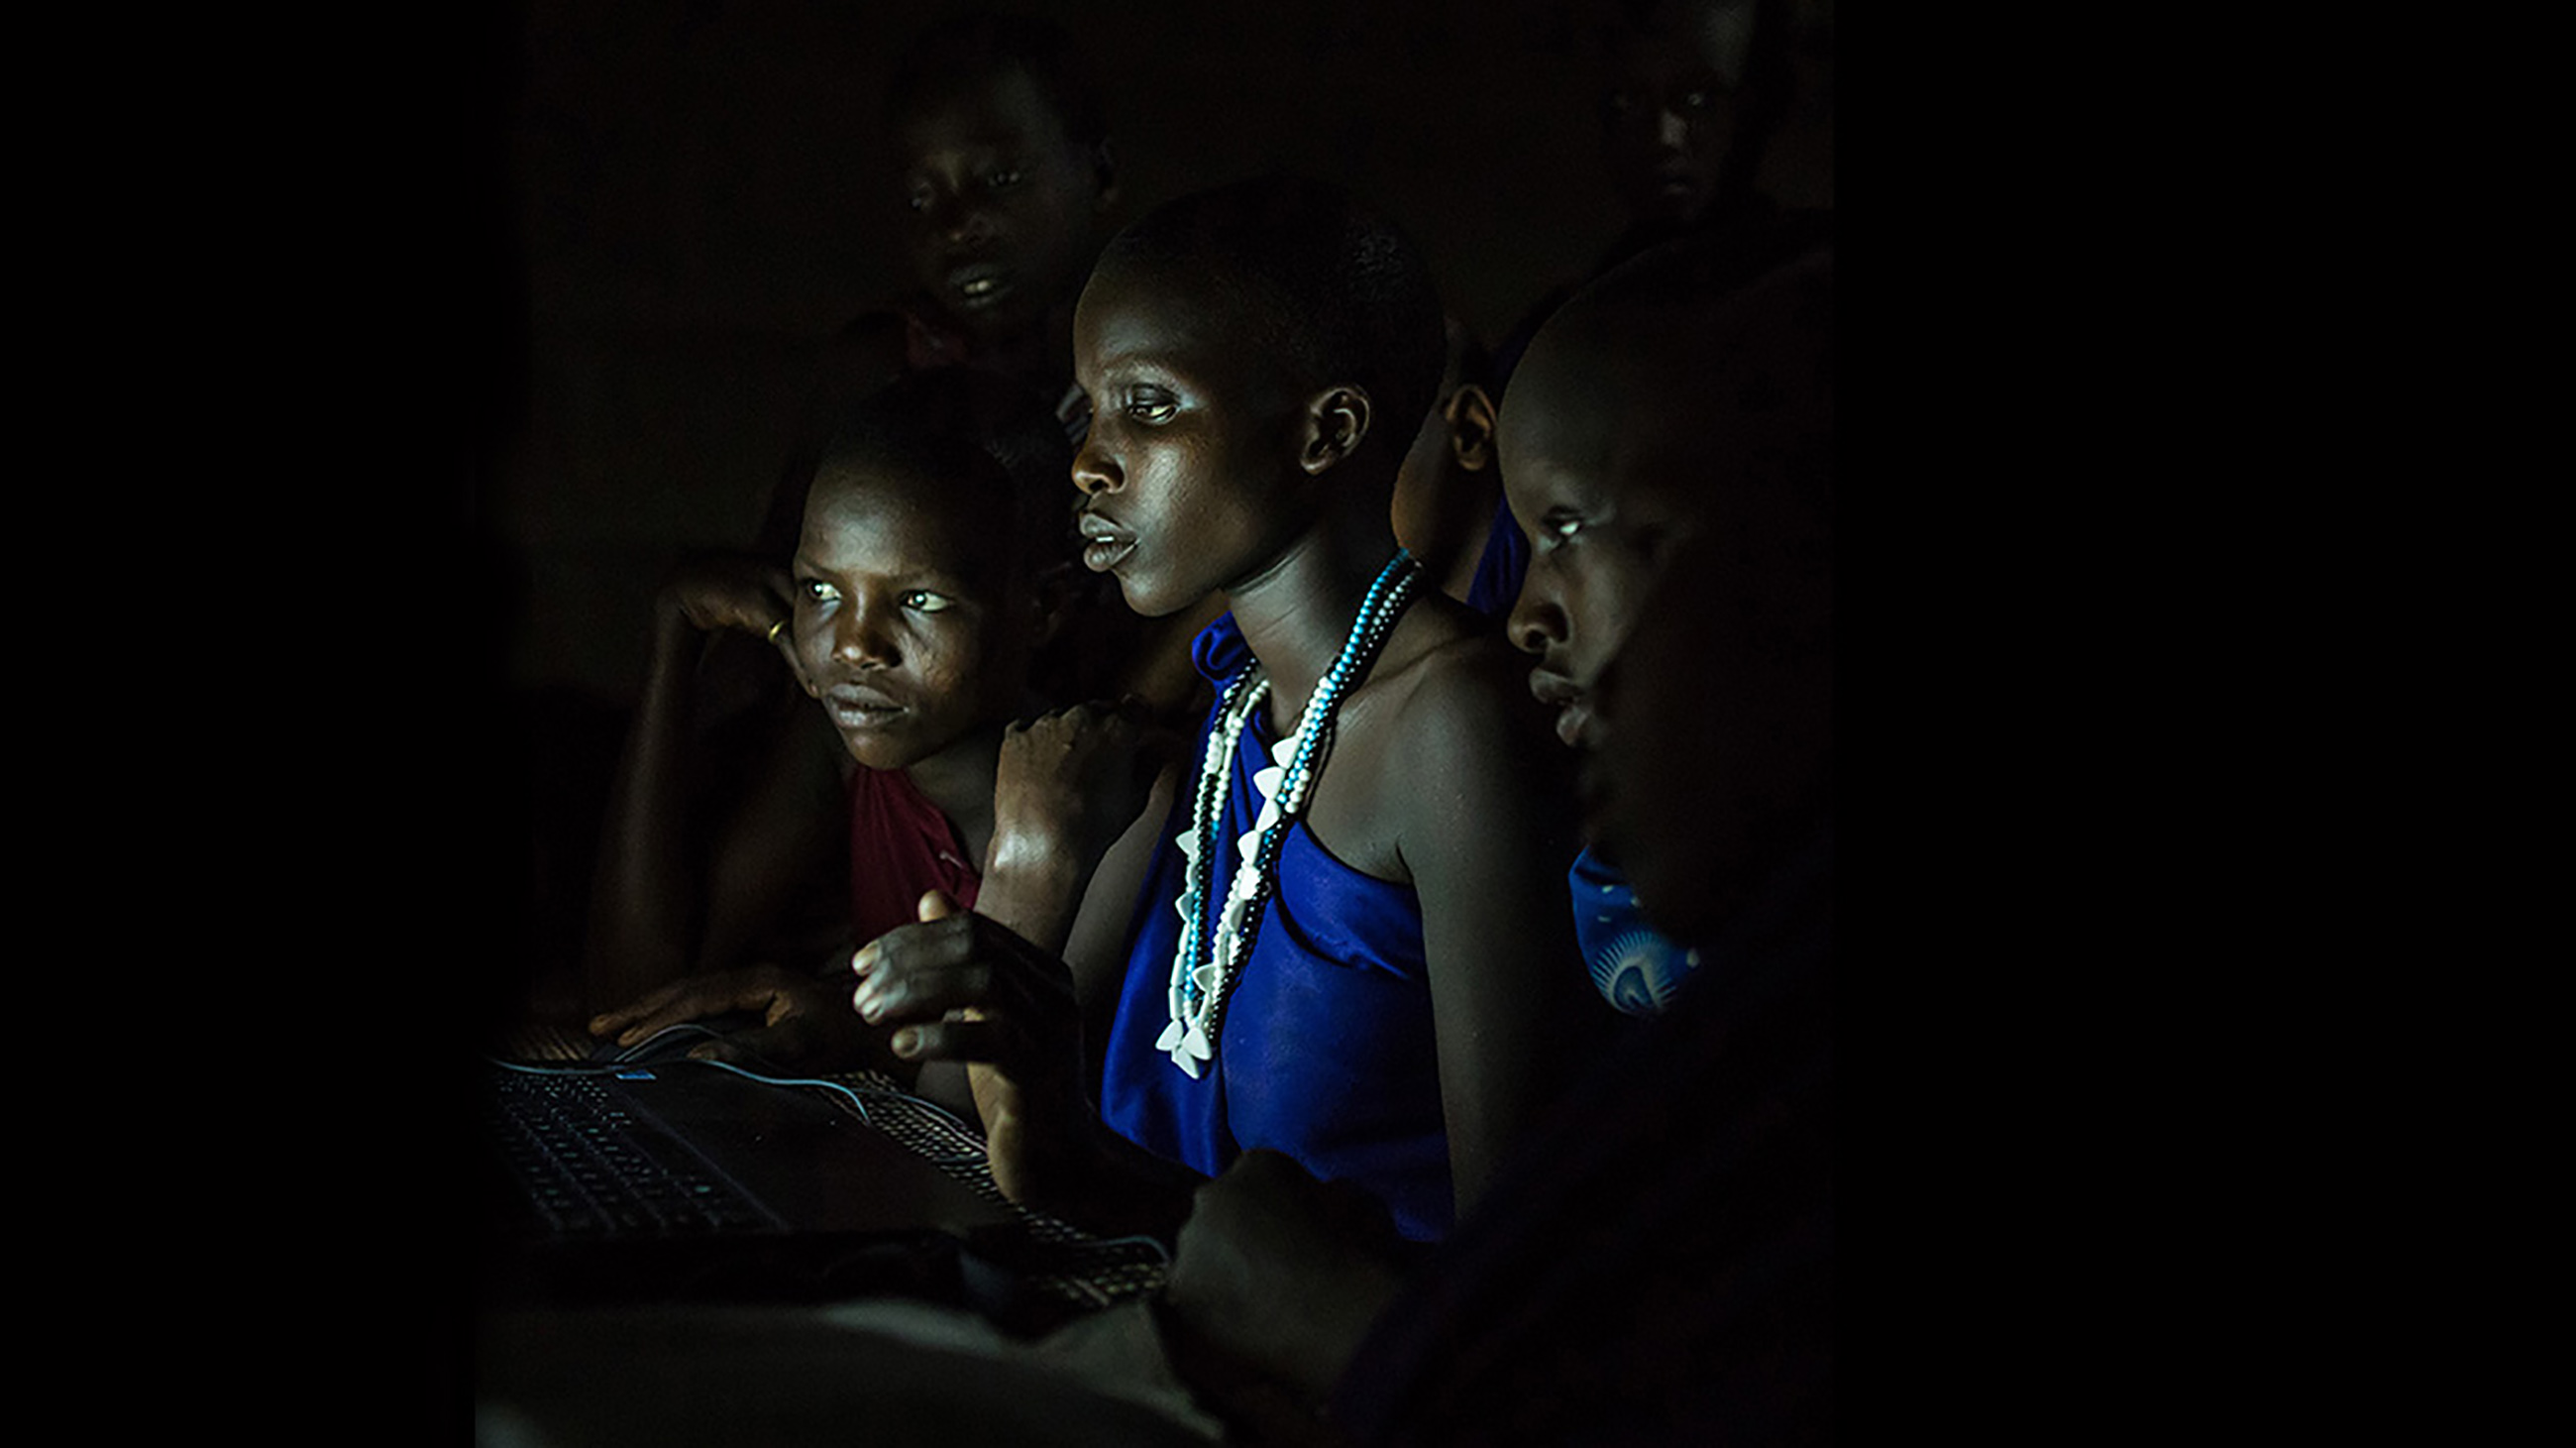 As many as 600 million people in sub-Saharan Africa still lack access to electricity. Will an Obama administration project aimed at expanding power there wither under Trump?